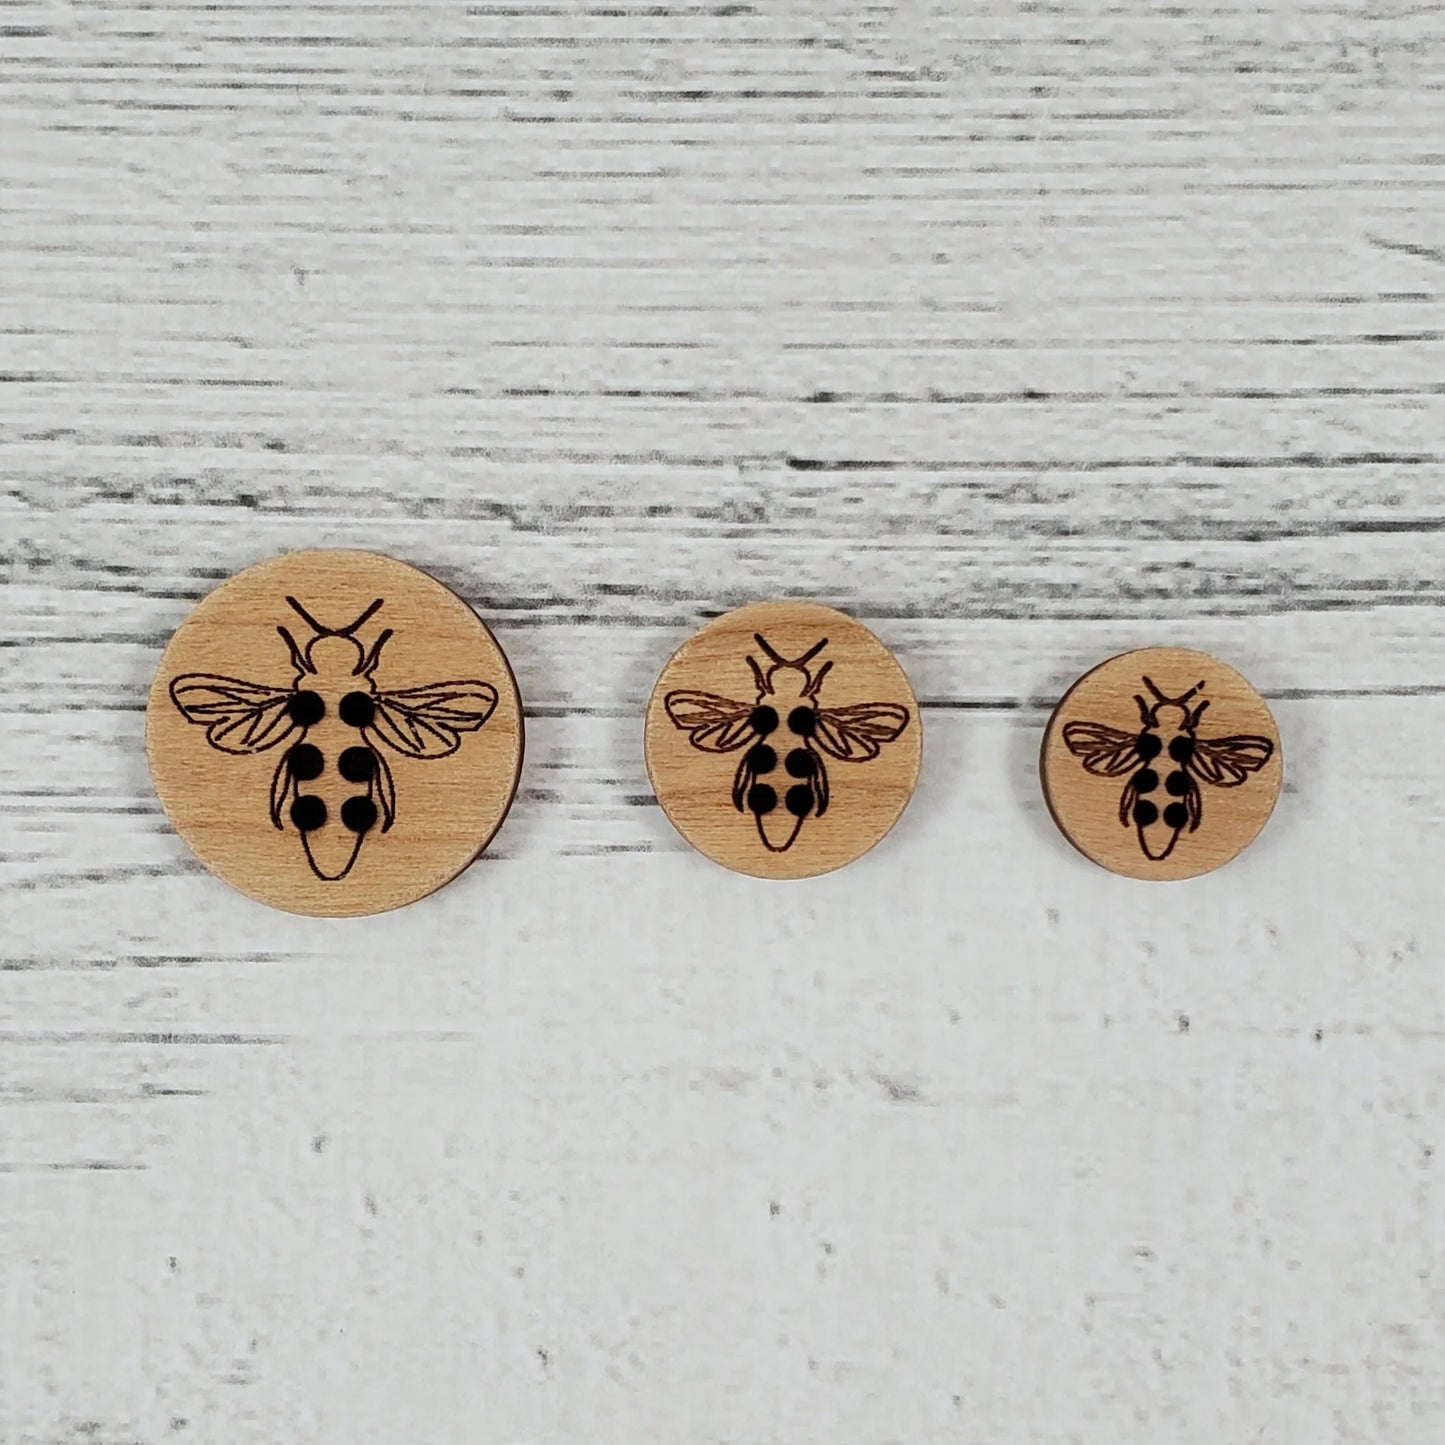 Katrinkles Stitchable Honeybee Buttons